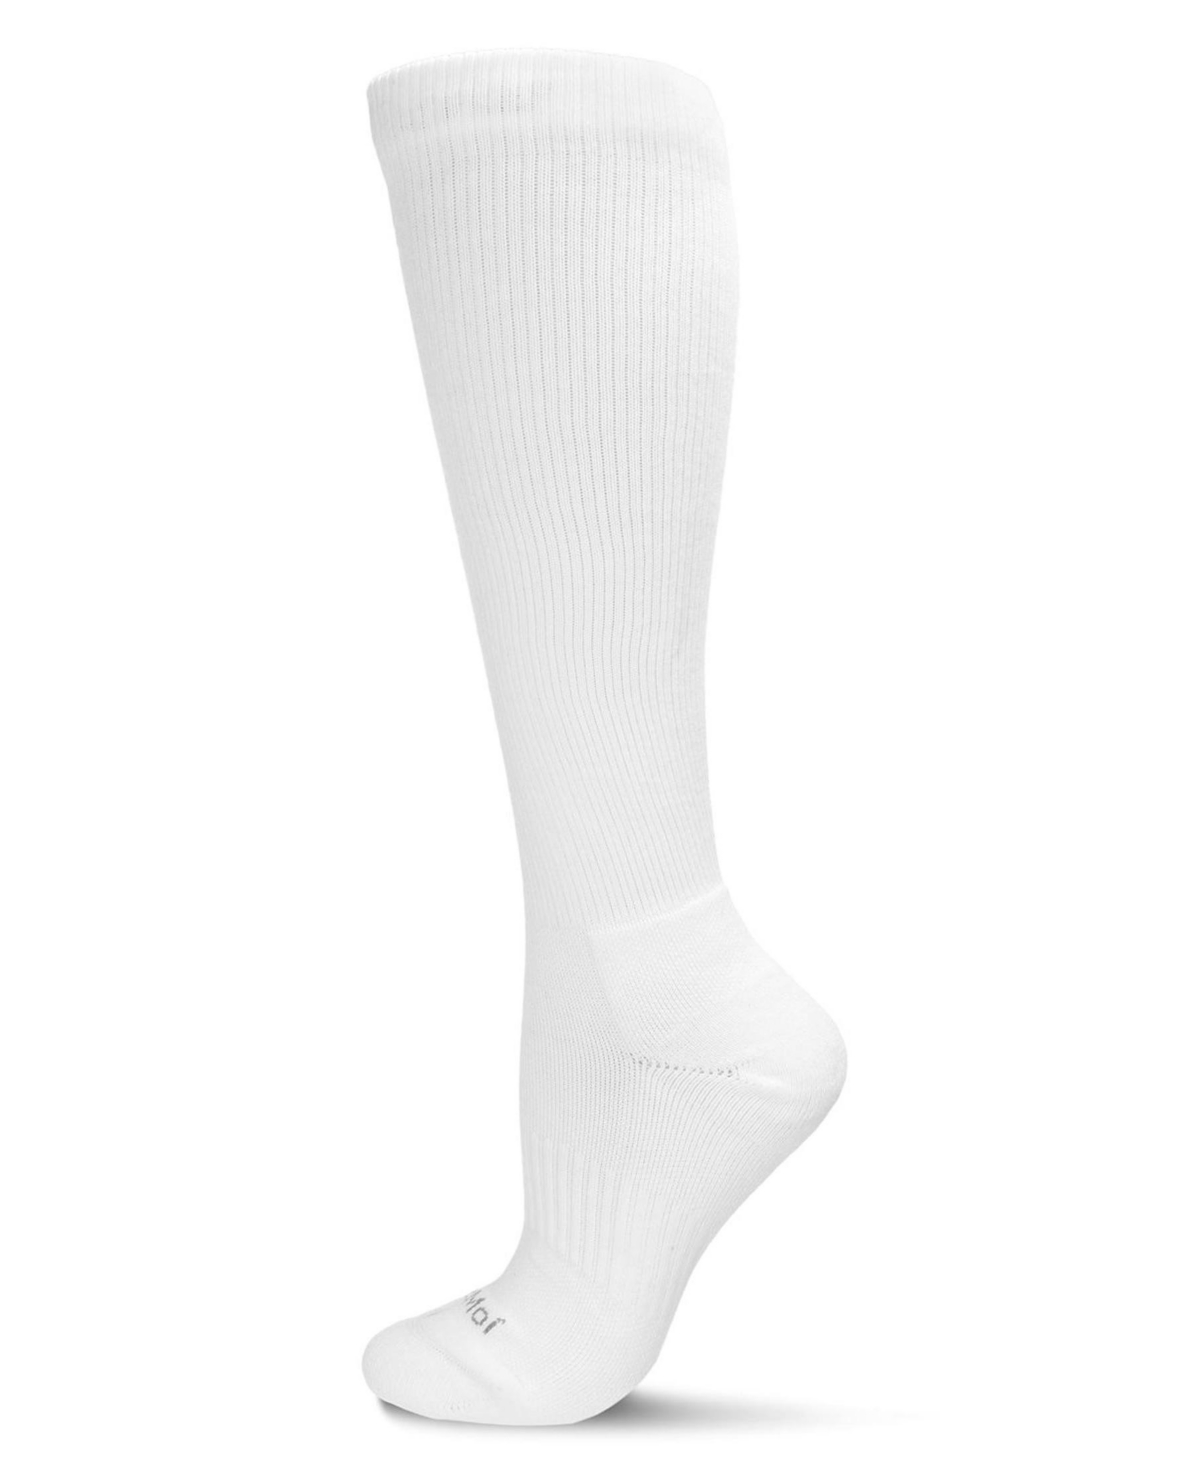 Unisex Classic Athletic Cushion Sole Knee High Cotton Blend 15-20mmHg Graduated Compression Socks - White